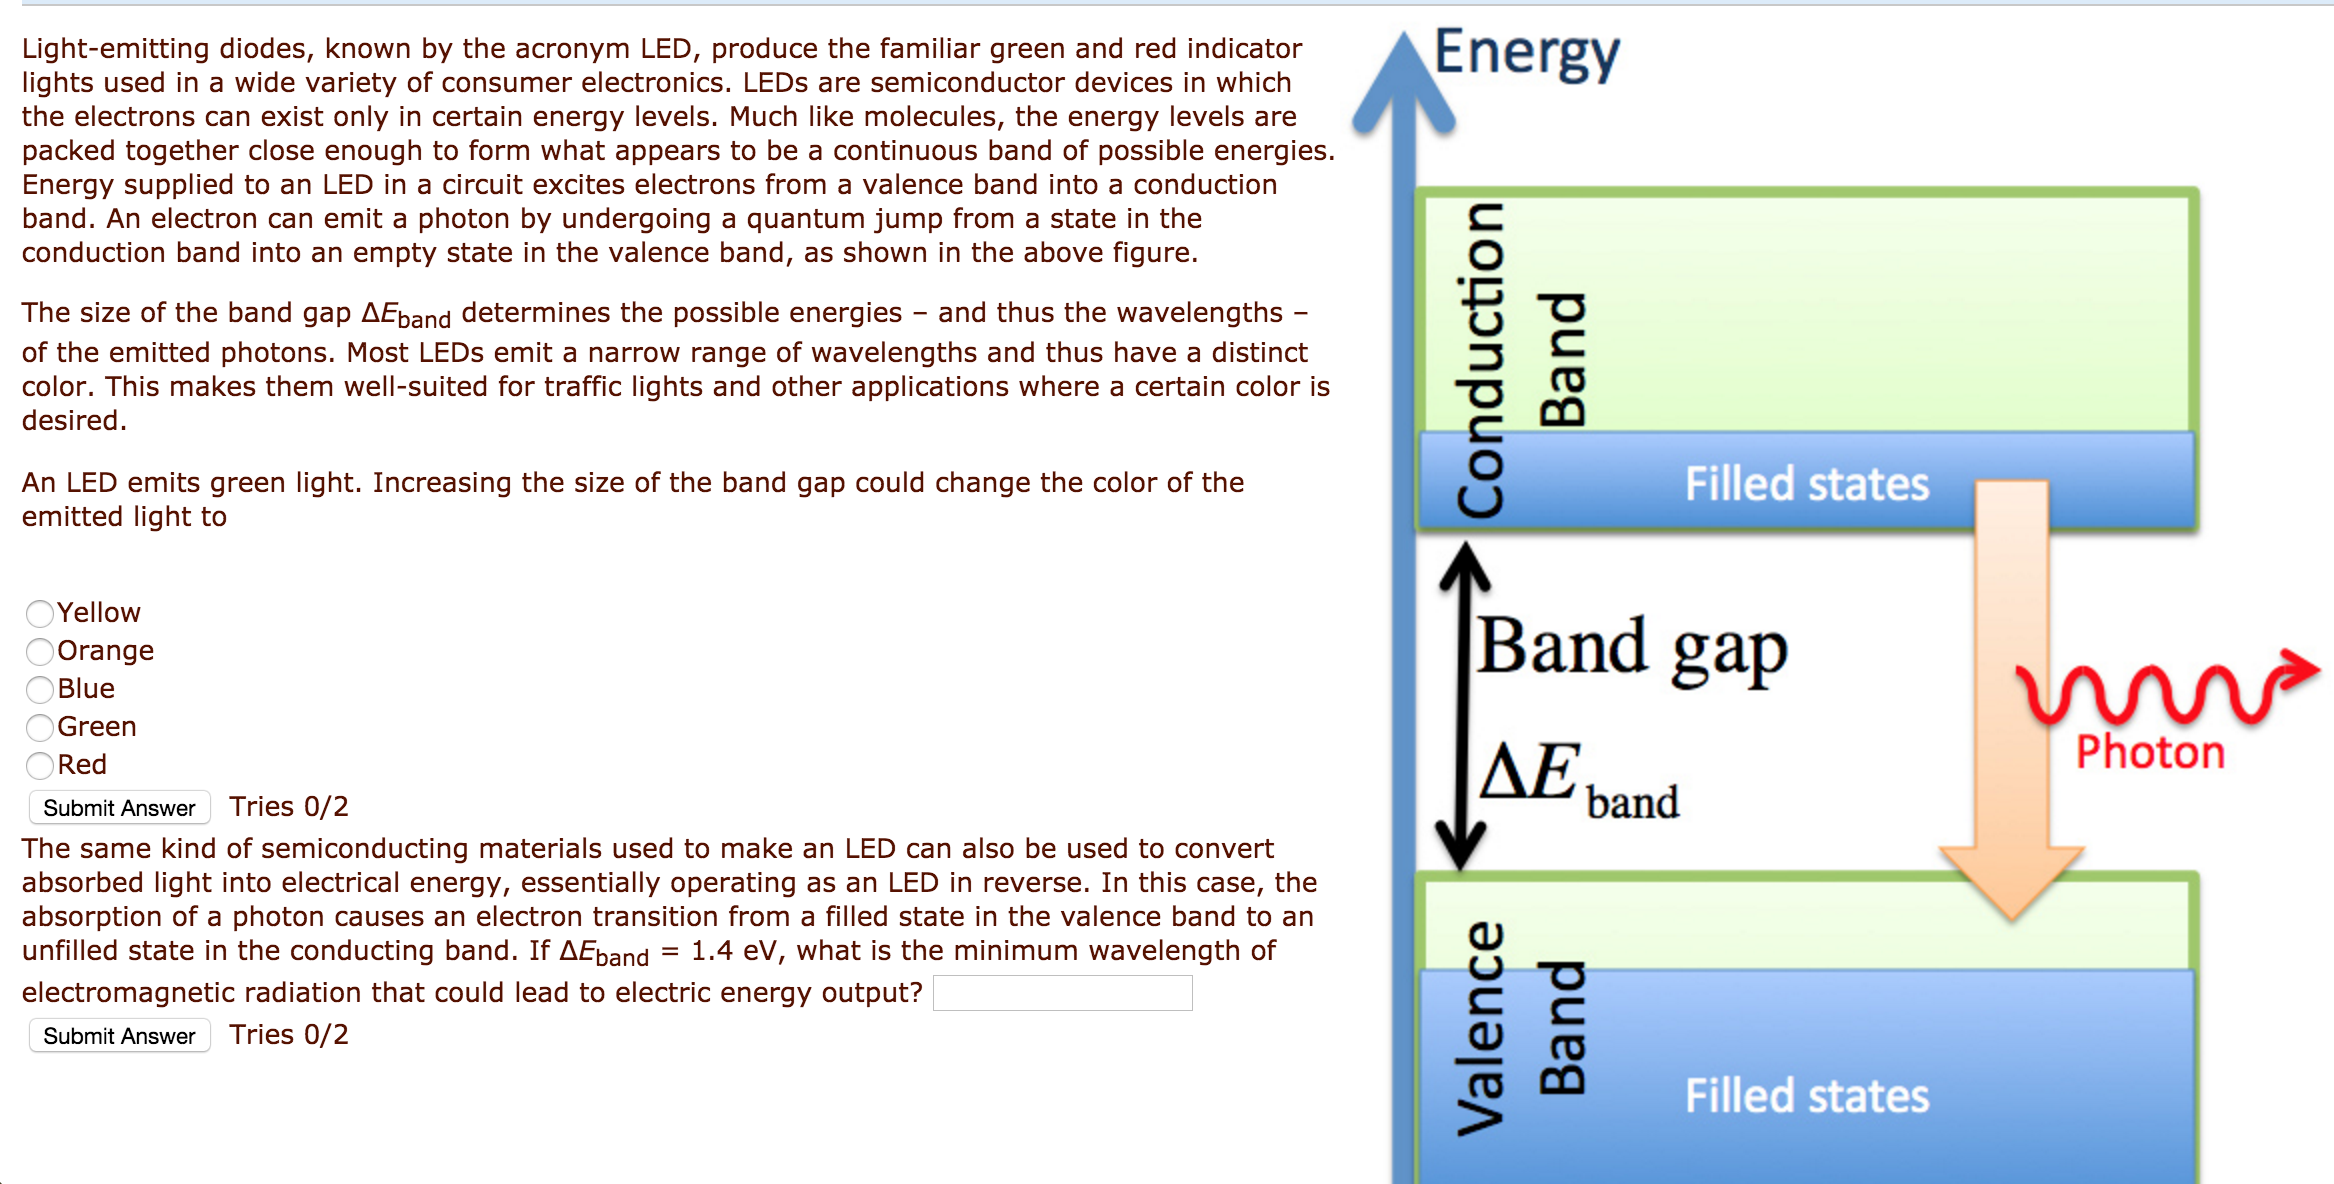 Light-emitting diodes, known by acronym LED, | Chegg.com